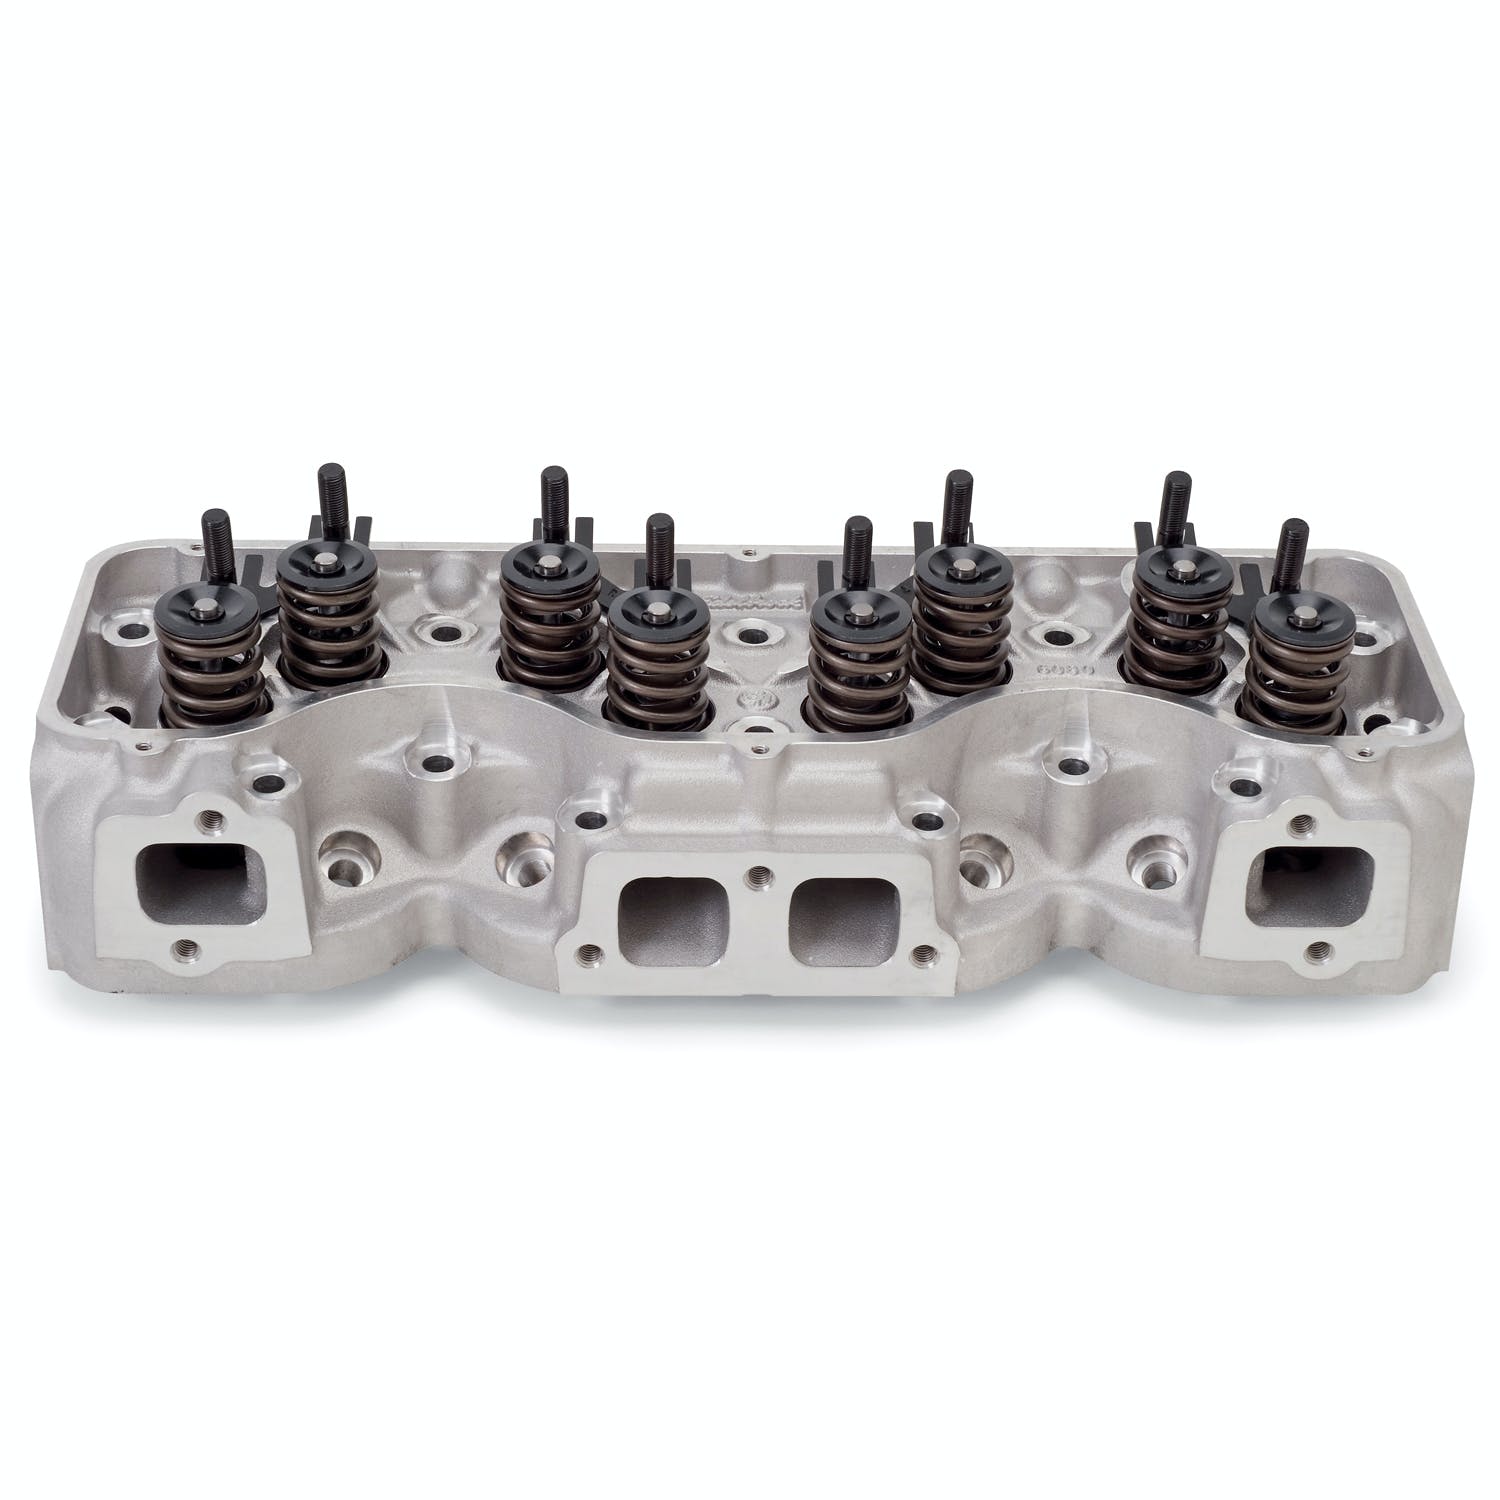 Edelbrock 60819 CYL HD BBC PERF RPM 348/409ci FOR HYD ROLLER FLAT TAPPET CAM COMPLETE